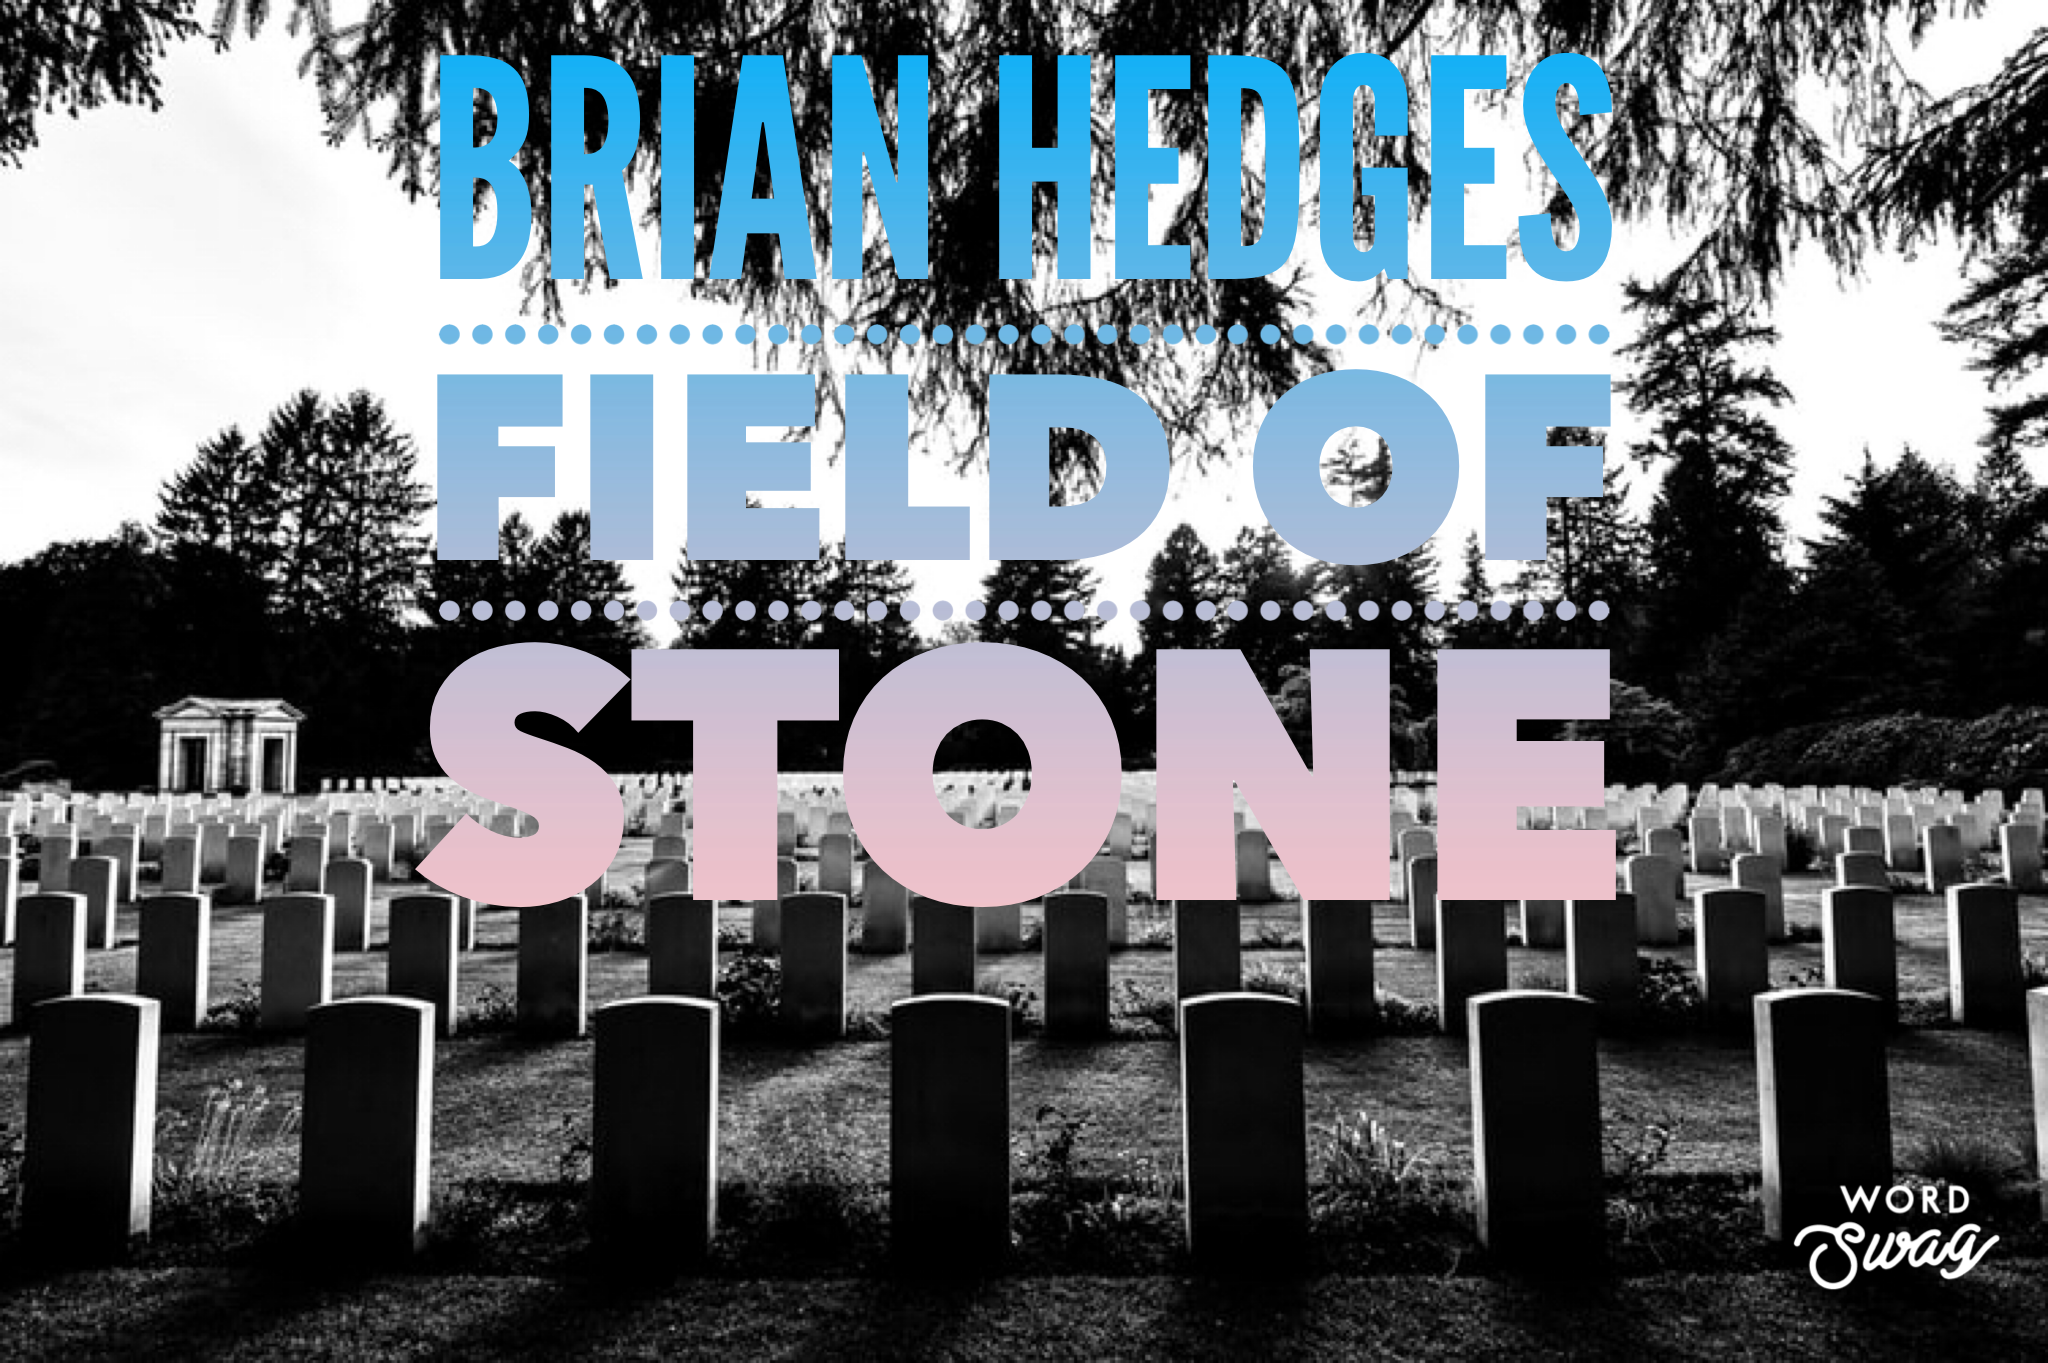 FoxPromotions in Co-operation with Groove House Records Announce the Release of Brian Hedges' New Song, FIELD OF STONE